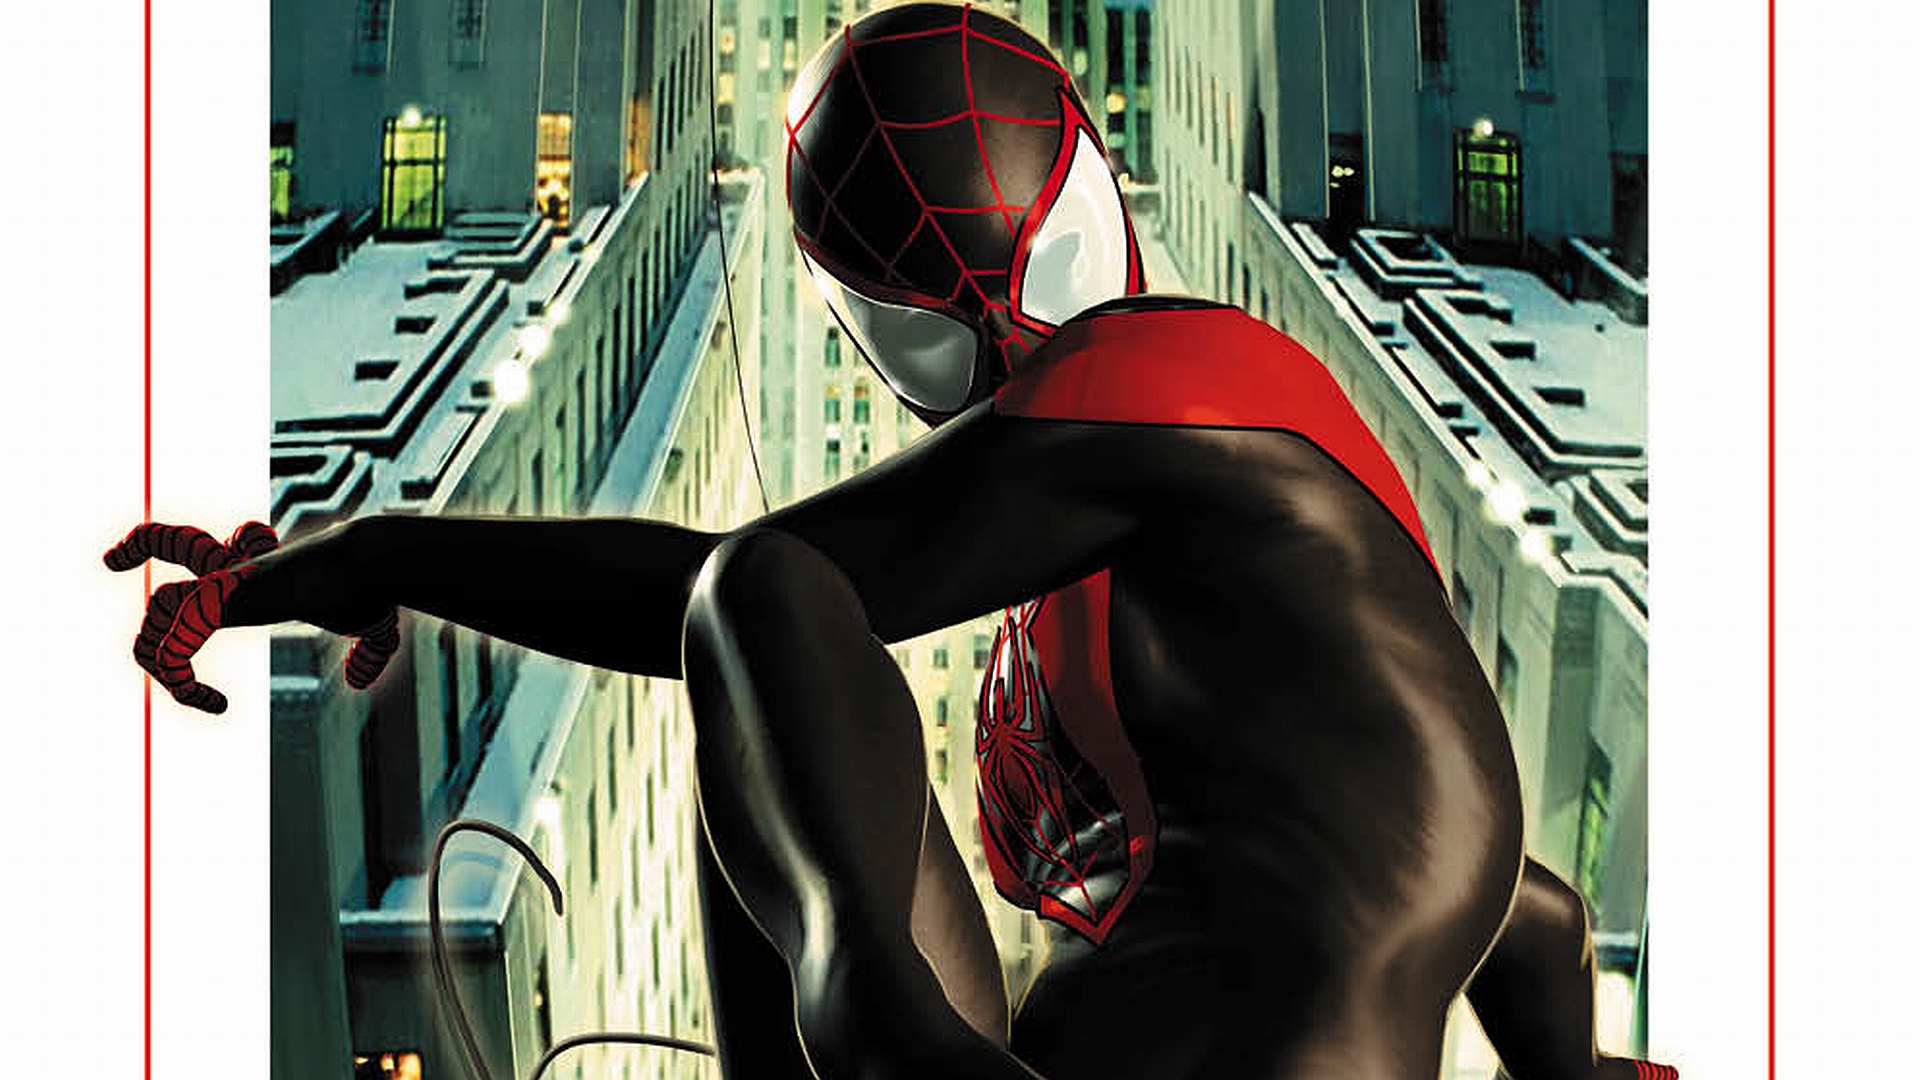 Spider-Man swinging through a cityscape in a dynamic comic book style.